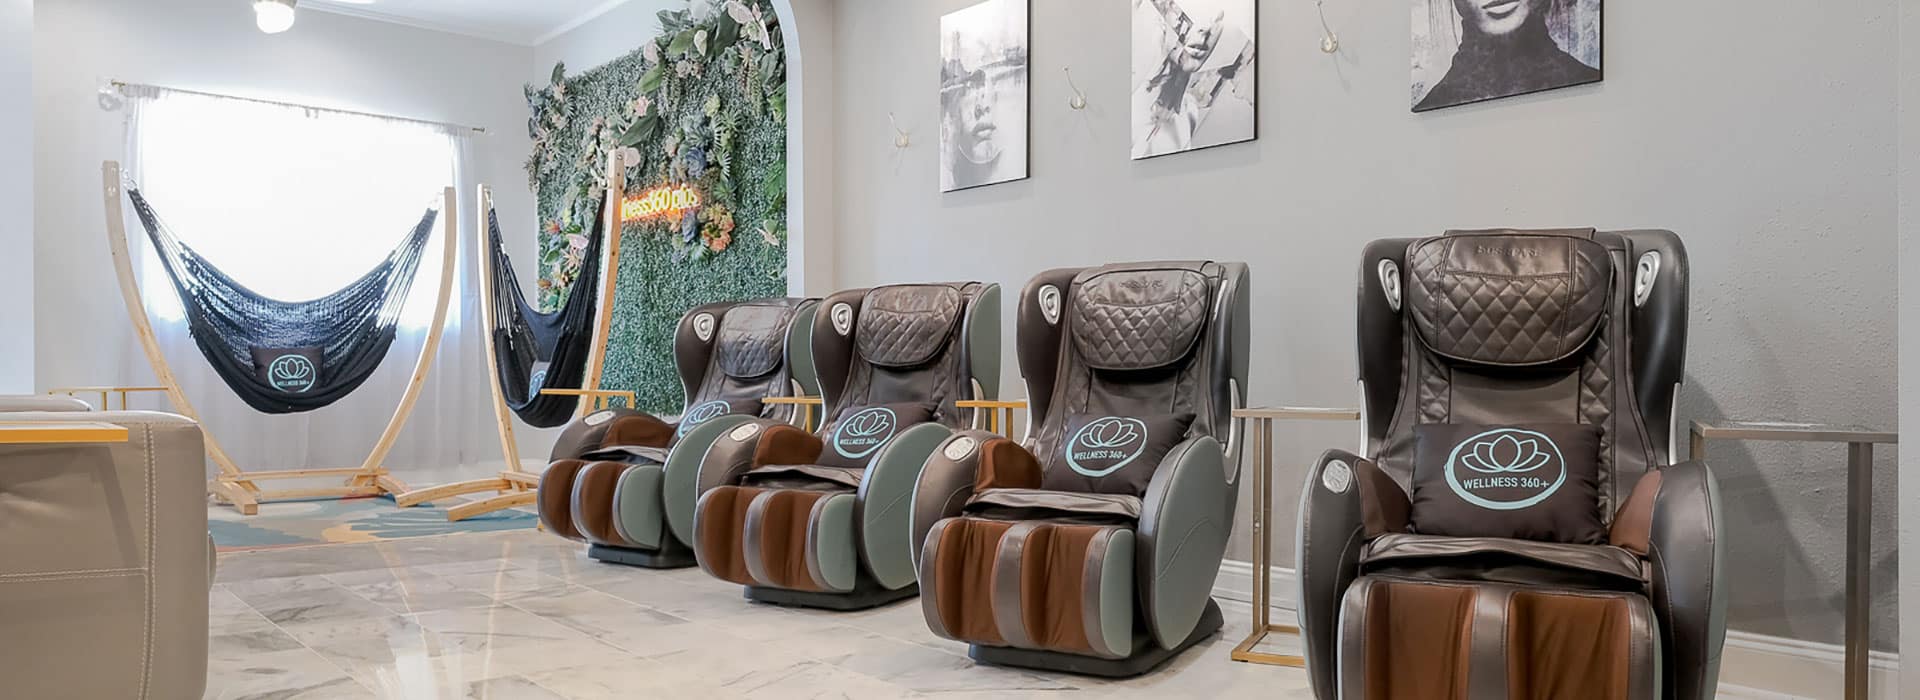 Contact Wellness 360 Plus in Tampa, Florida (Photo: Inside Wellness 360 Plus Med Spa)